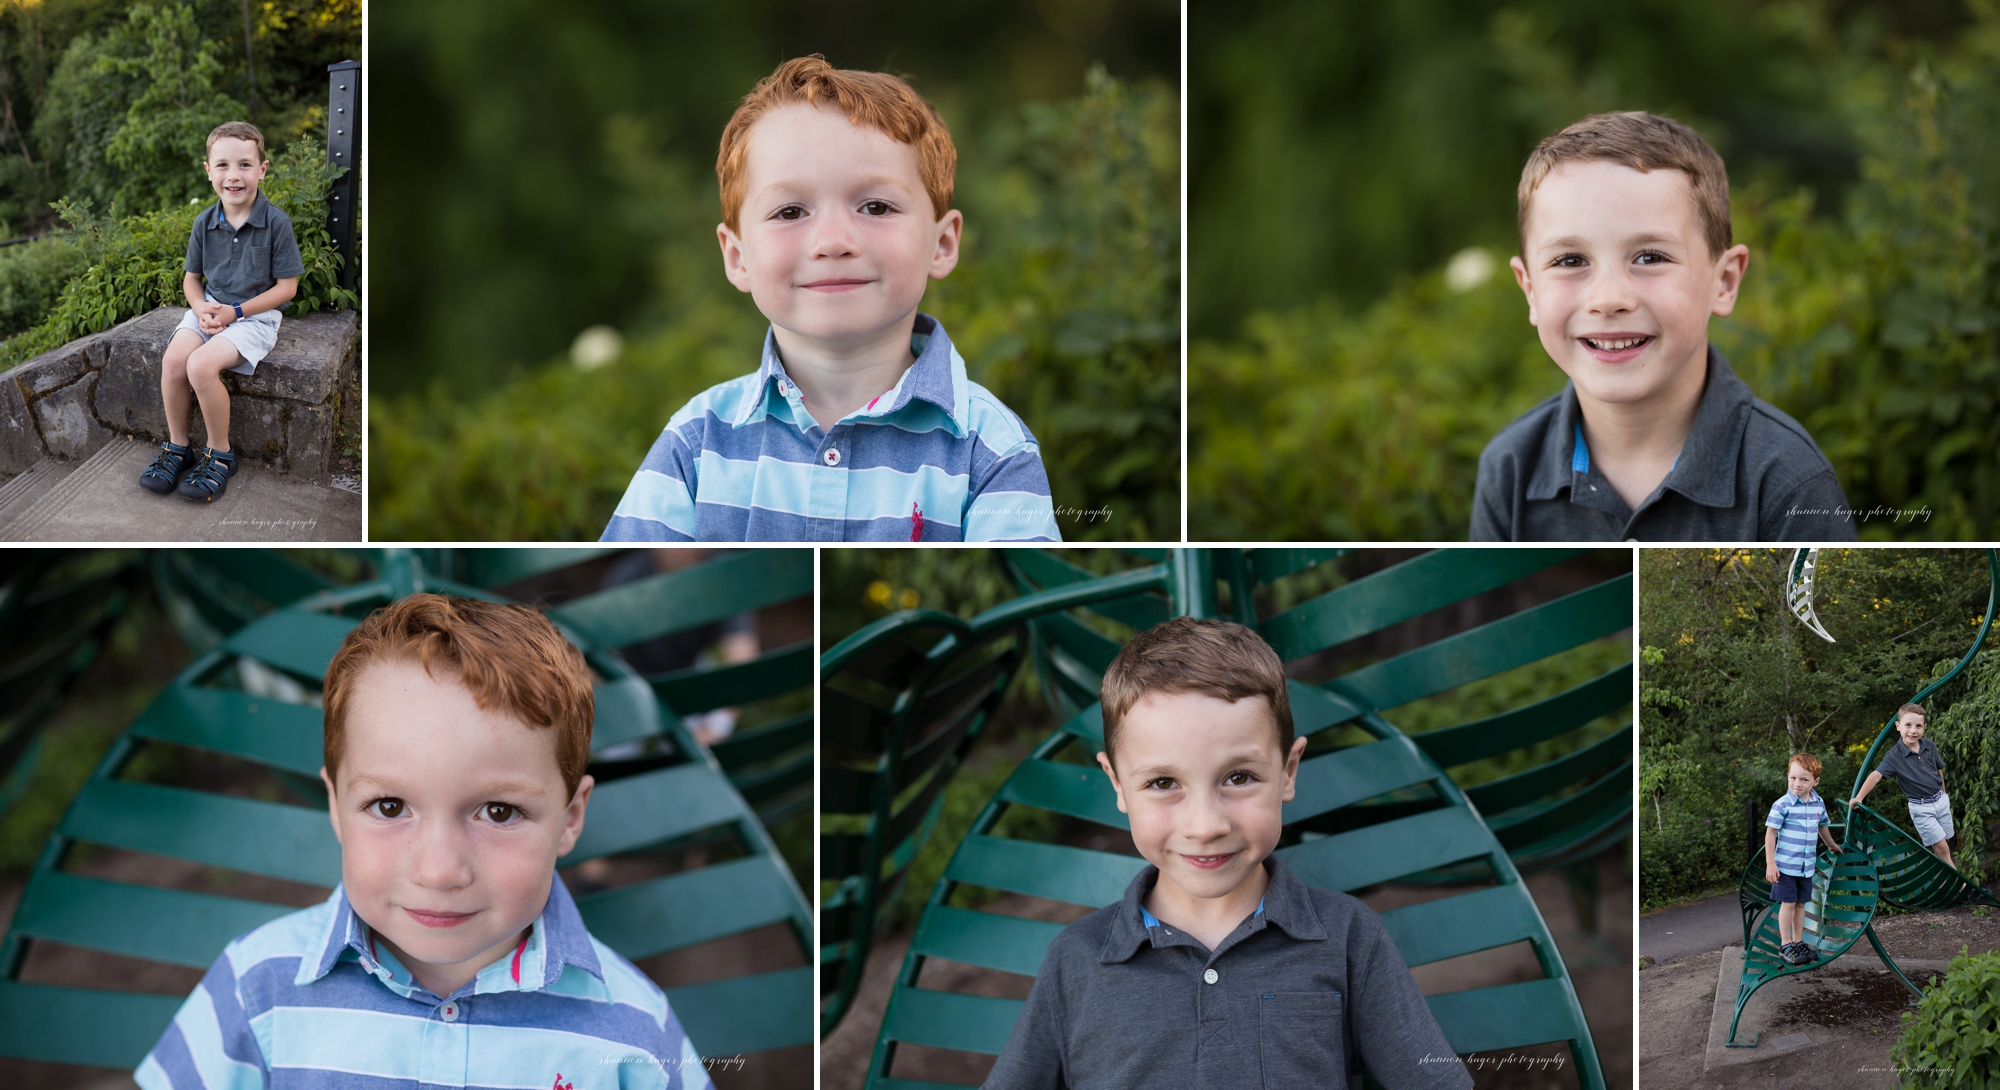 george rogers park family session, lake oswego family photographer, portland family photography, shannon hager photography